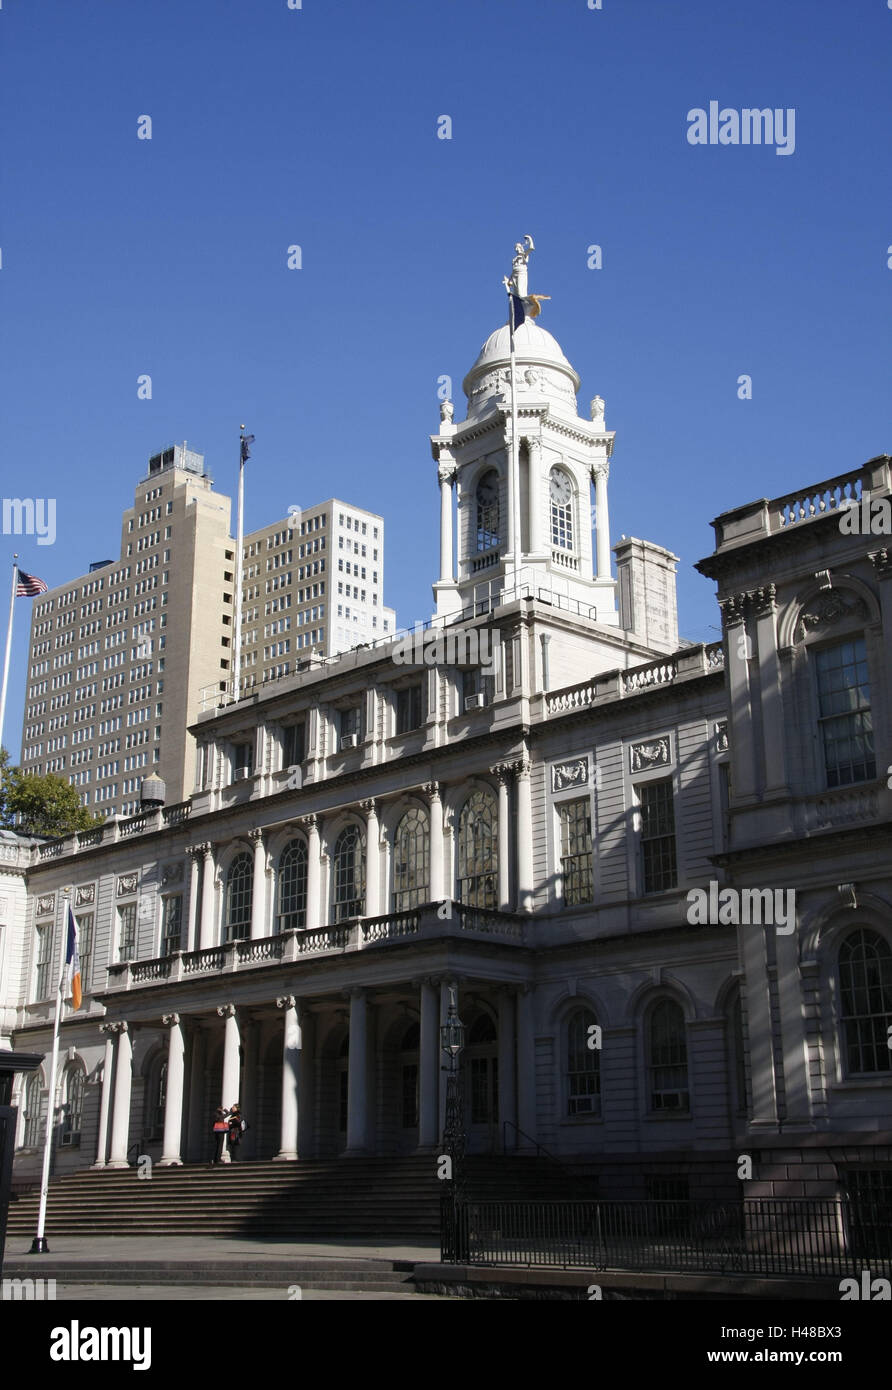 The USA, New York city, city hall, North America, town, high rises, houses, office buildings, administration buildings, buildings, historically, outside, tower, pillars, stairs, input, Stock Photo